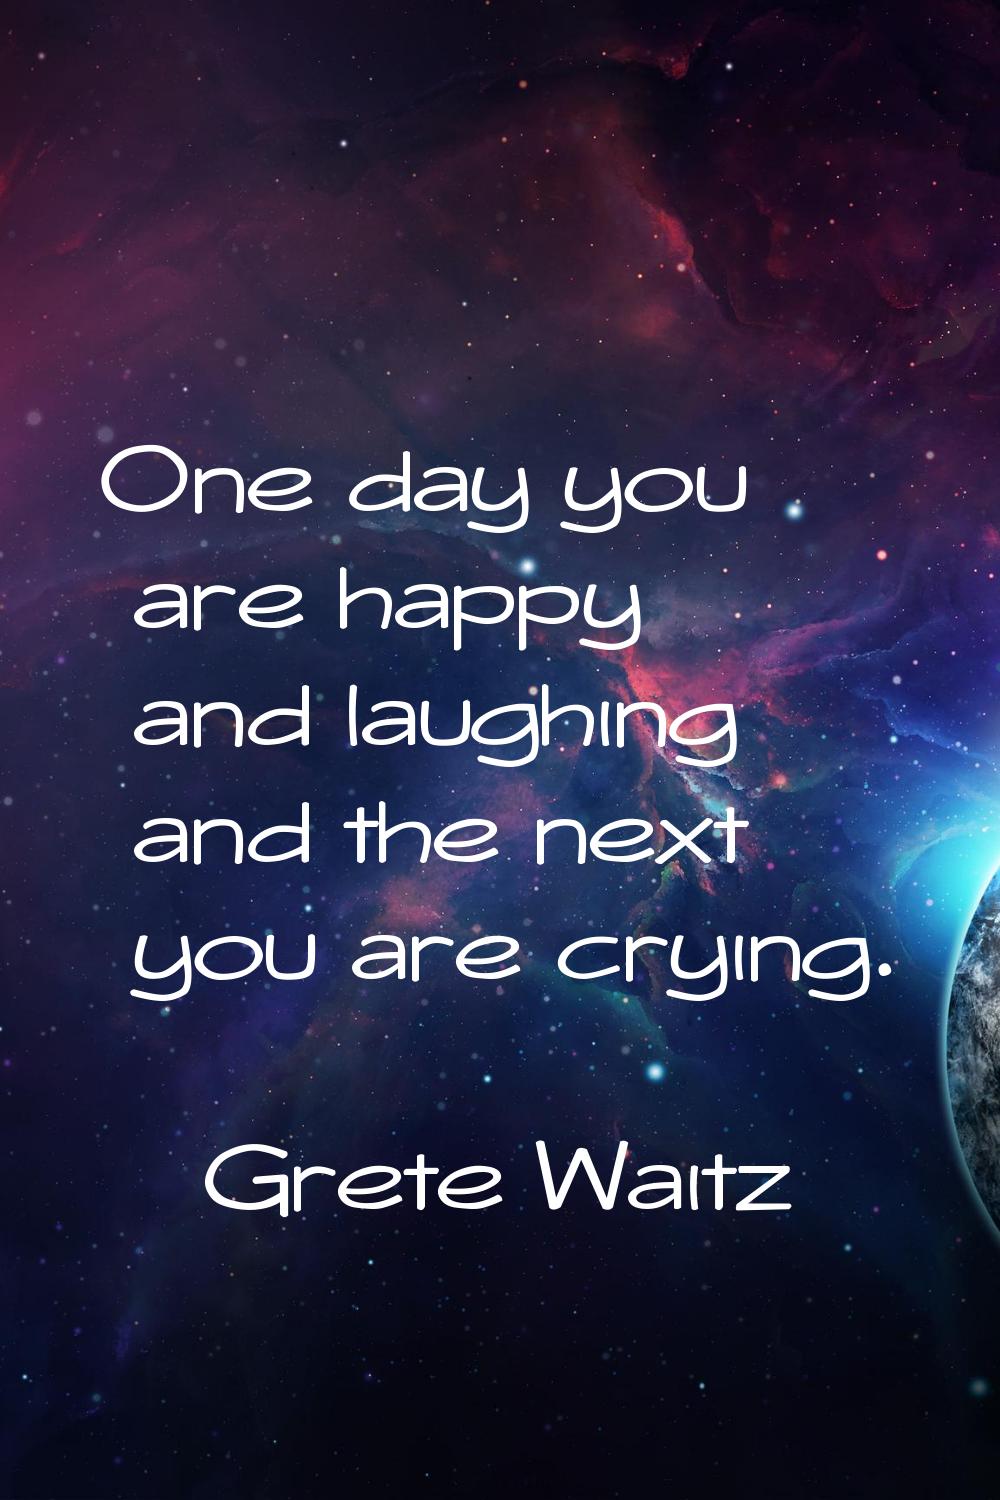 One day you are happy and laughing and the next you are crying.